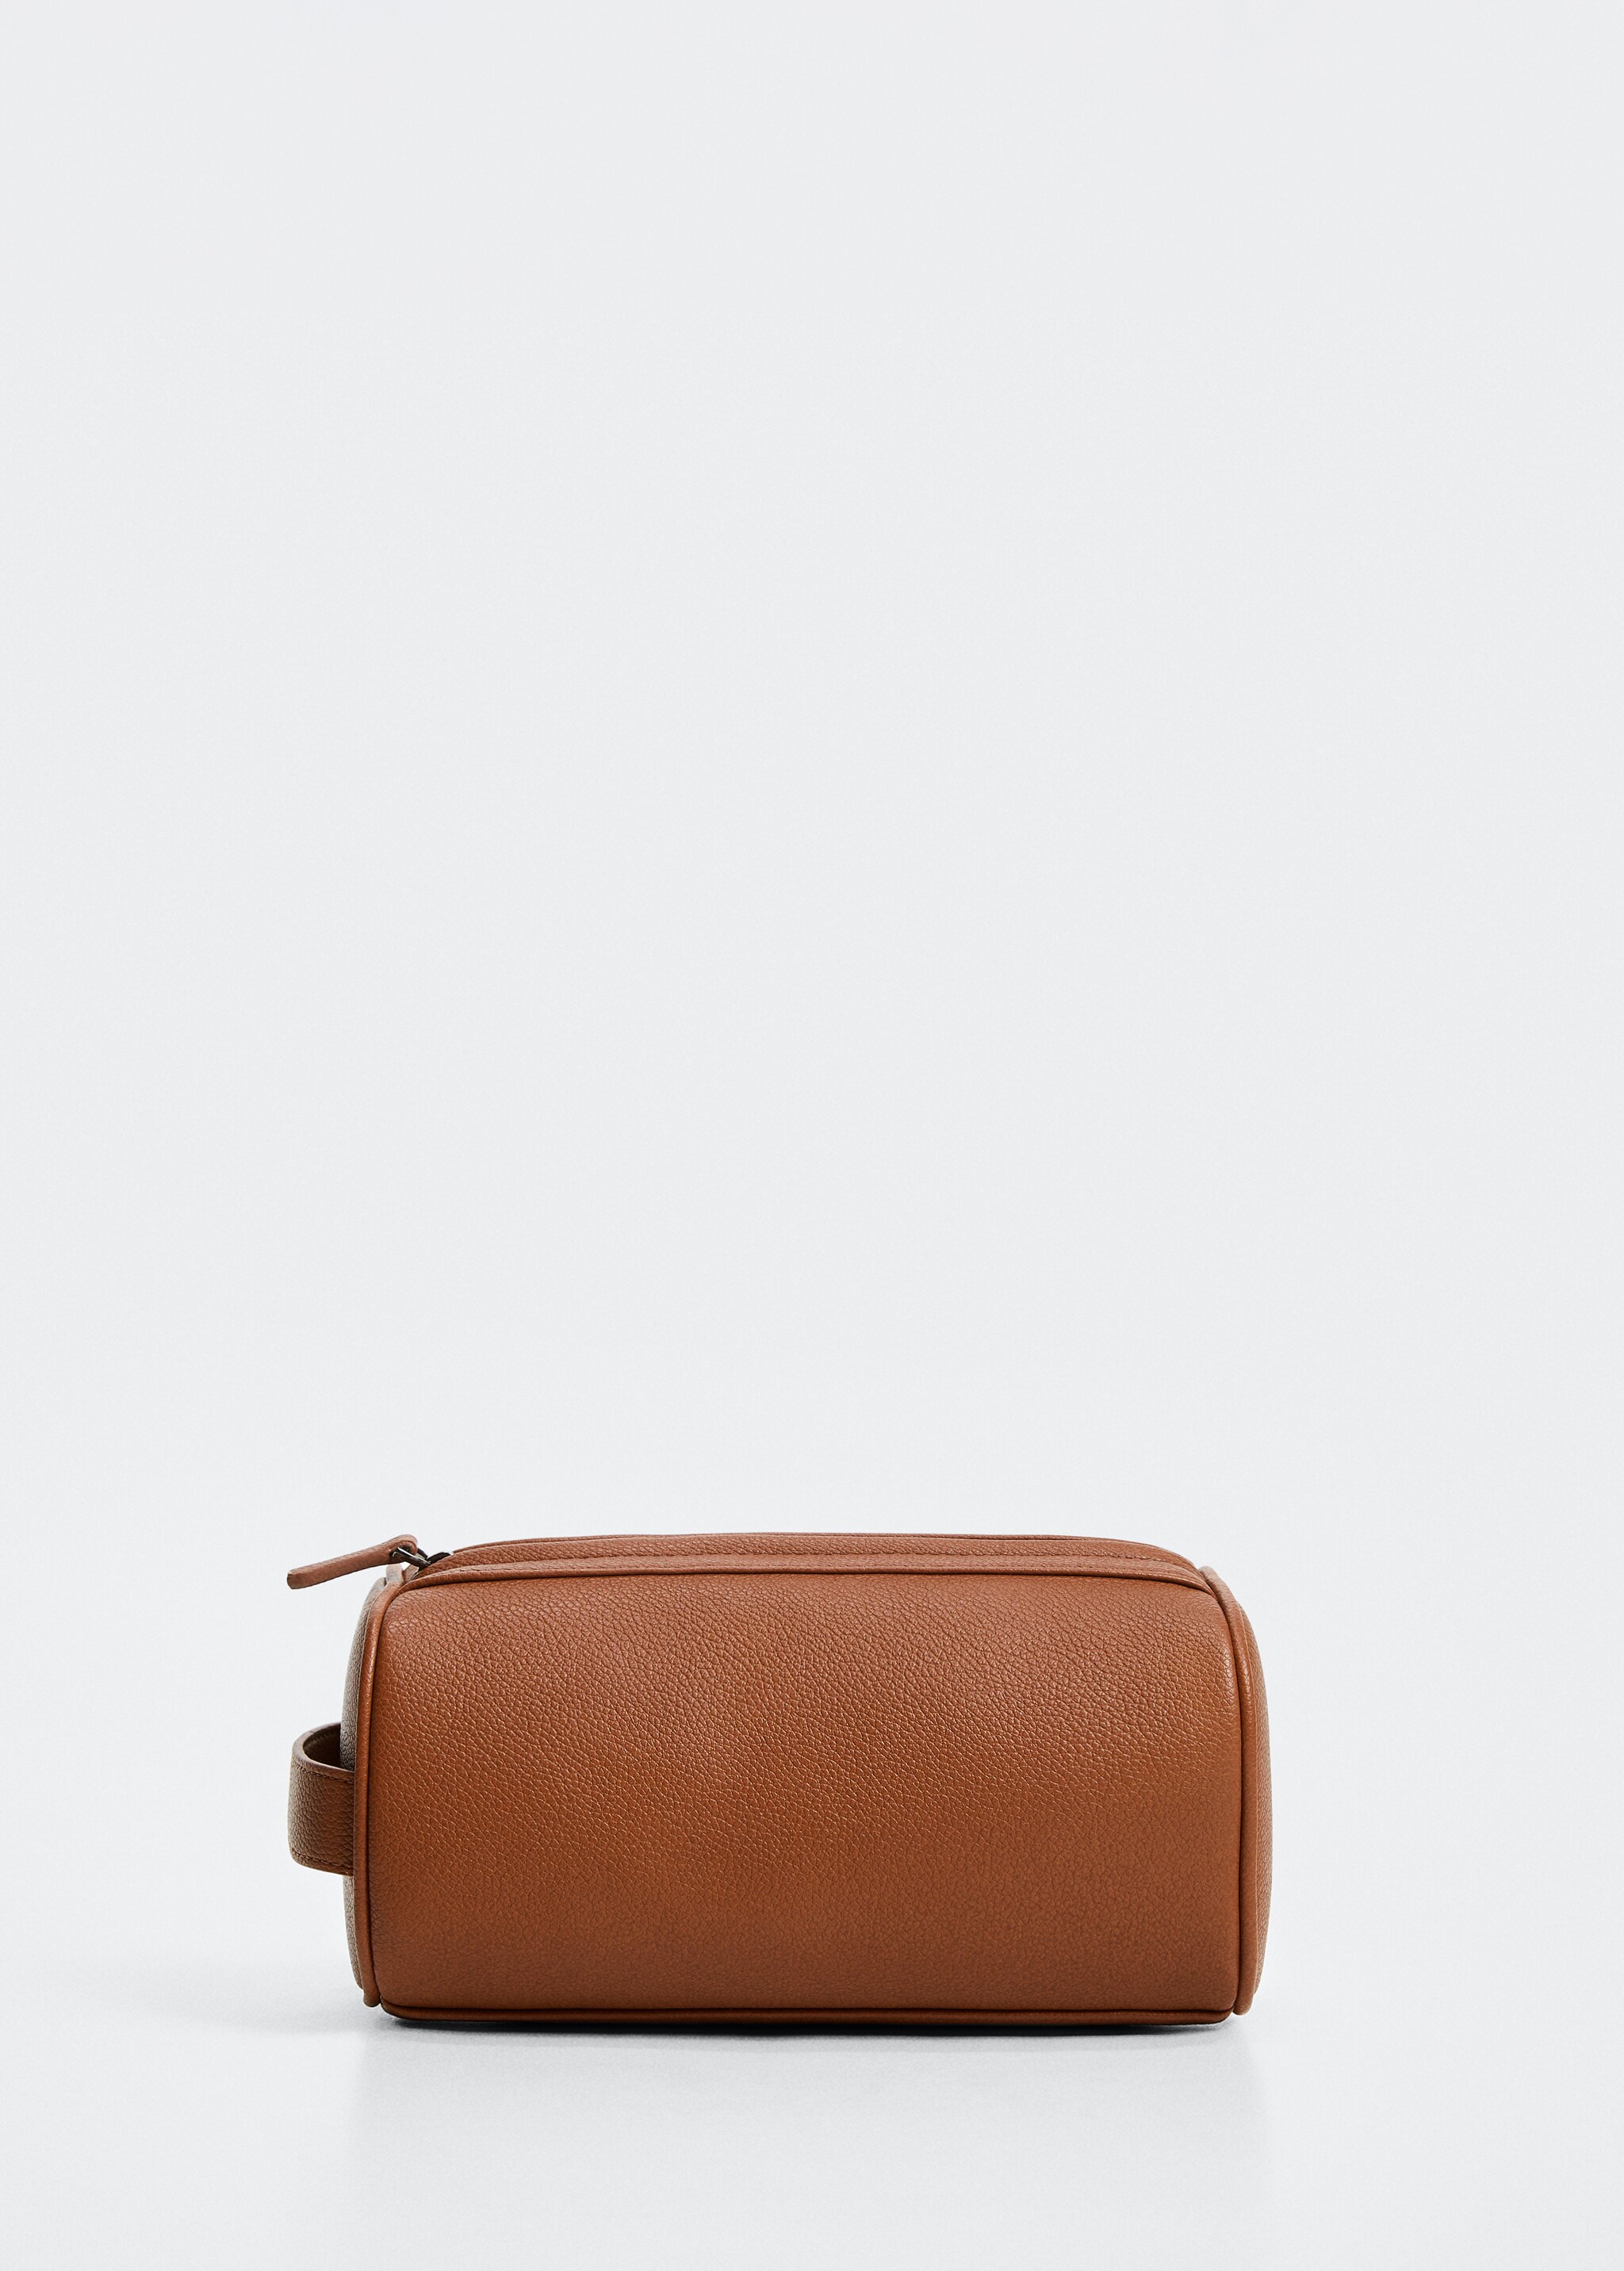 Leather-effect toiletry bag - Article without model